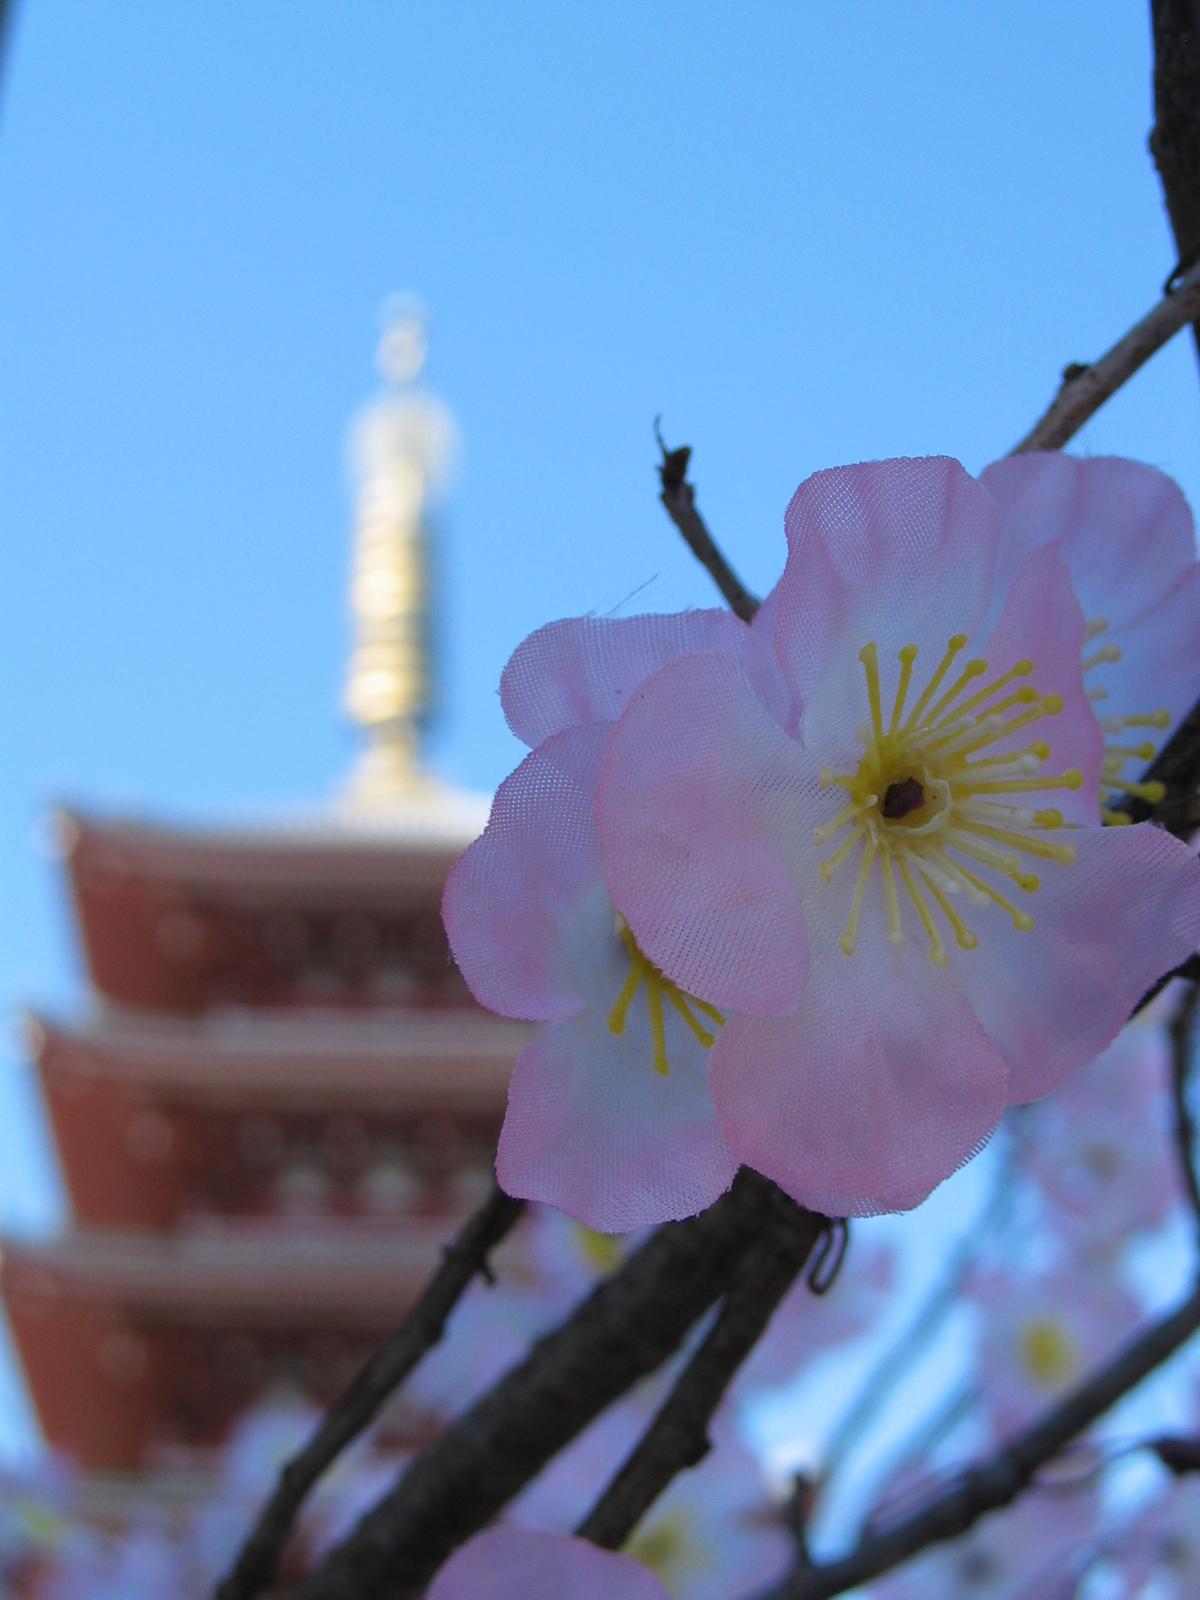 Cherry blossoms and pagoda